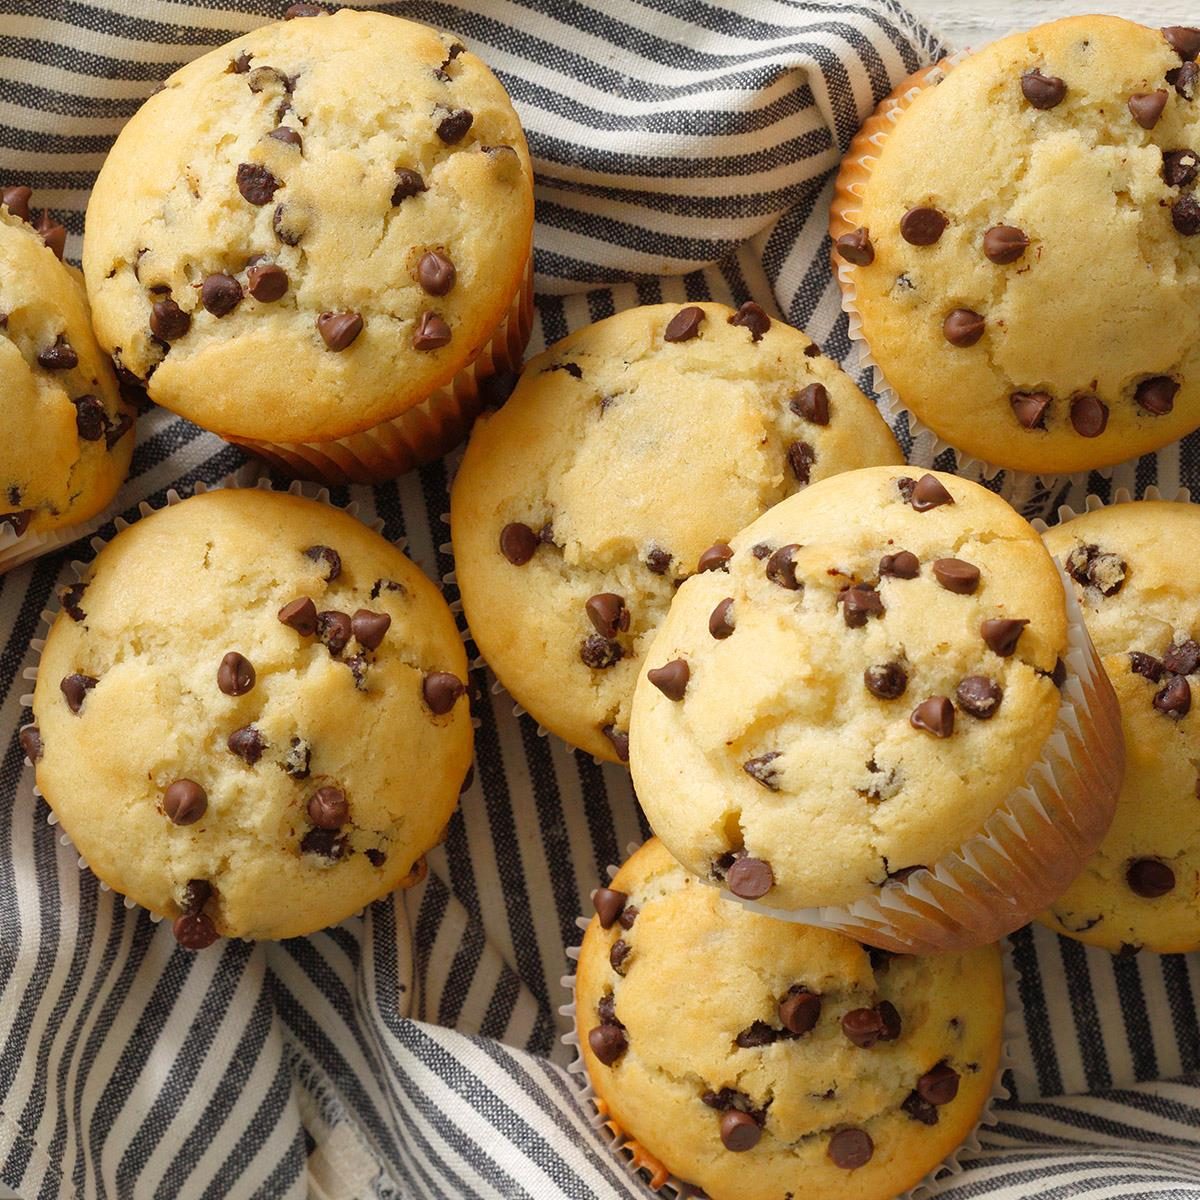 muffin-recipe-ideas-70-muffins-worth-waking-up-for